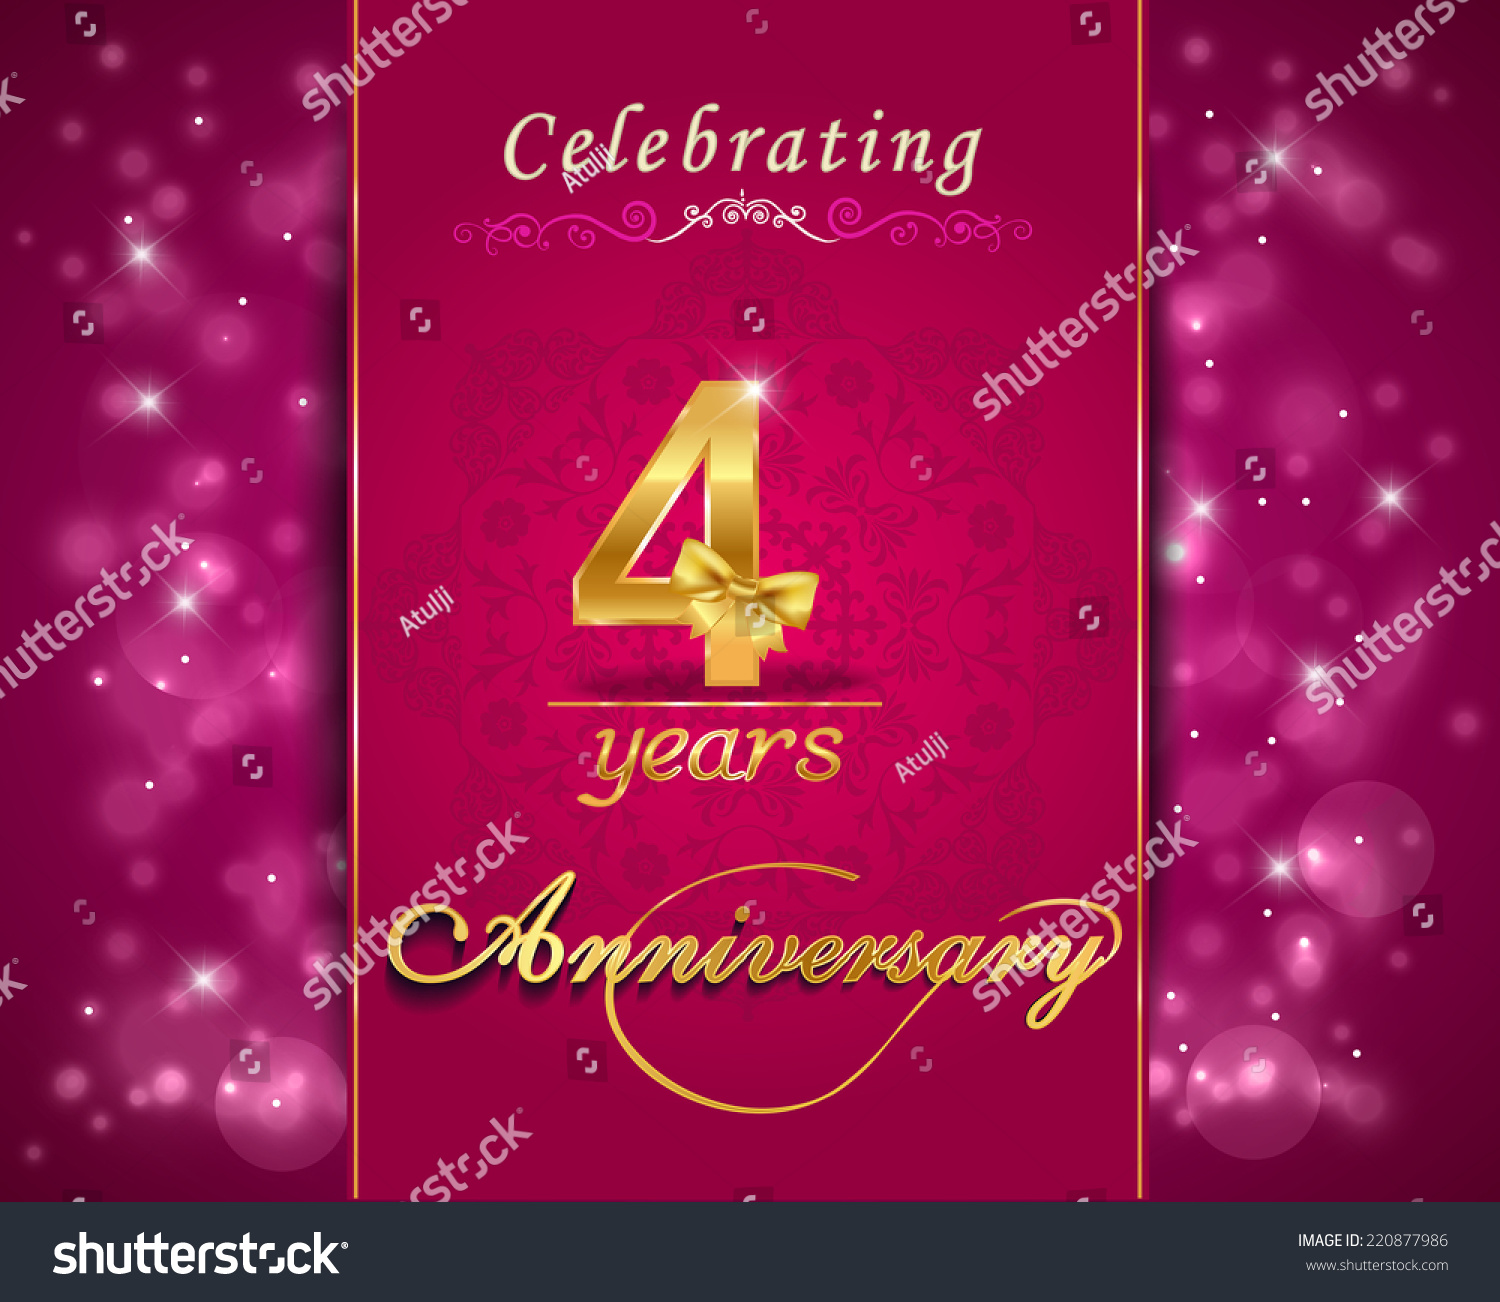 SVG of 4 year anniversary celebration sparkling card, 4th anniversary vibrant background -  vector eps10 svg